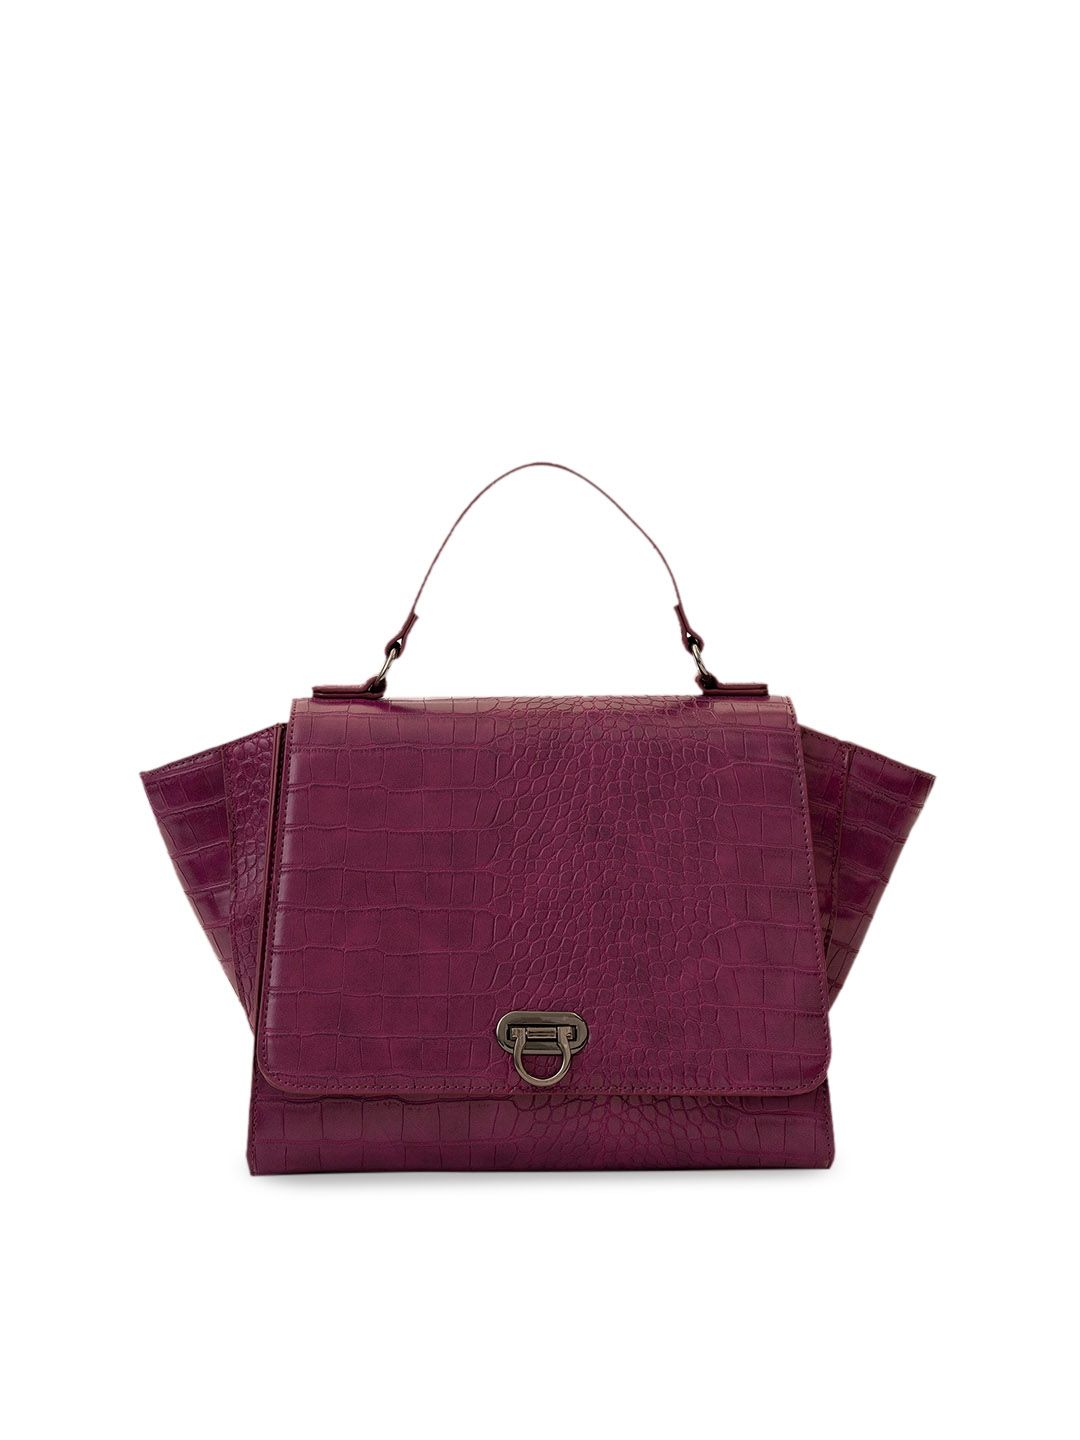 MIRAGGIO Violet Textured Swagger Satchel Bag Price in India